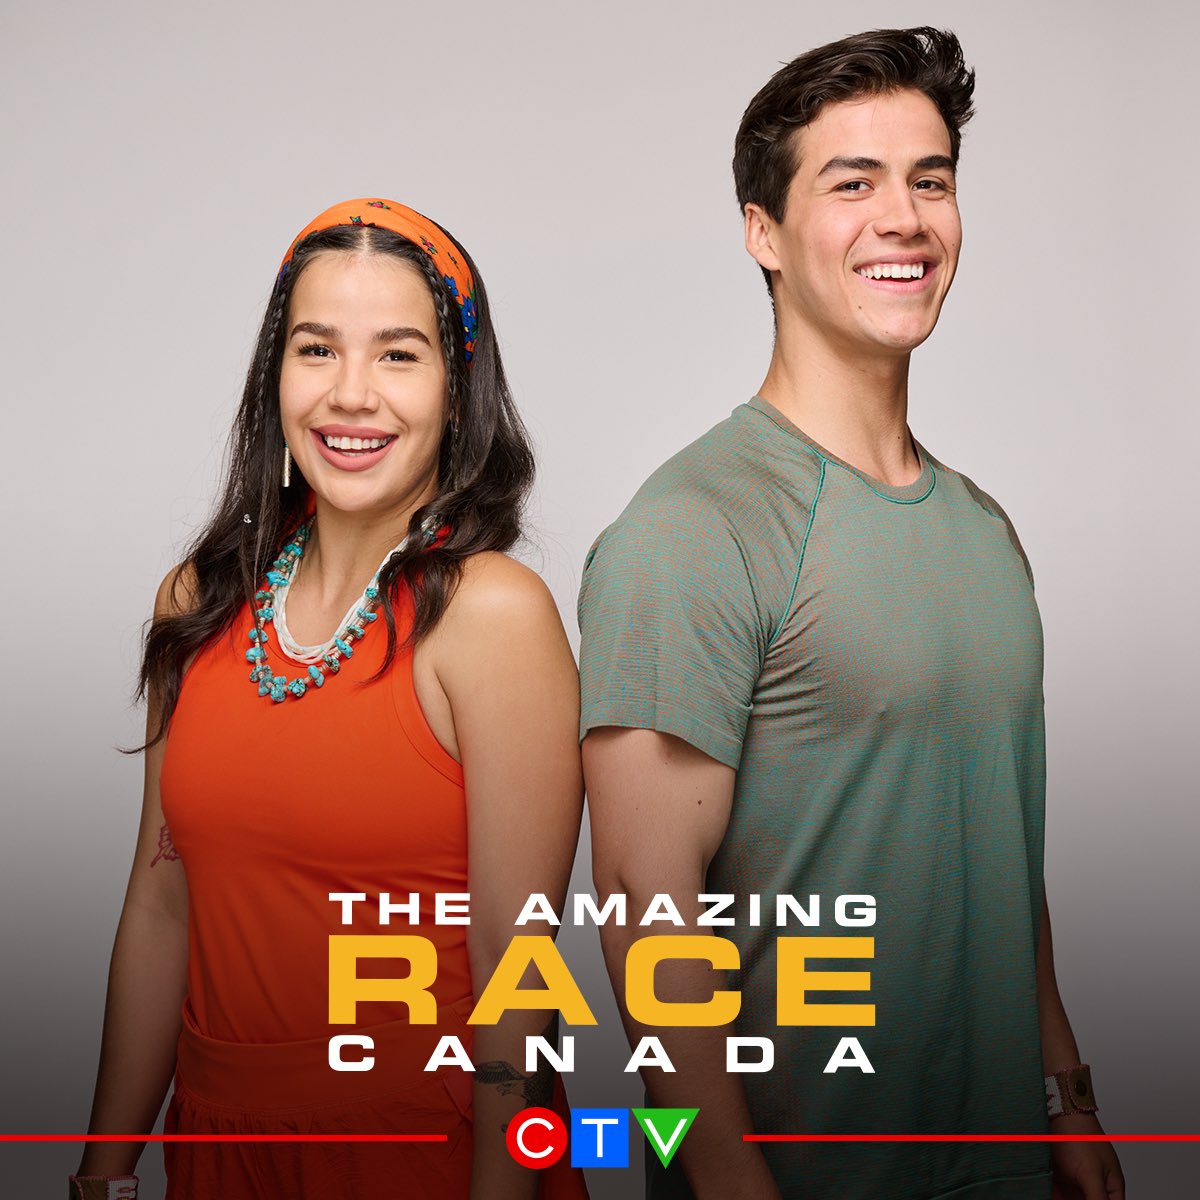 This sibling duo Shayla and Joel are ready to INSPIRE Indigenous youths on The #AmazingRaceCanada 💪